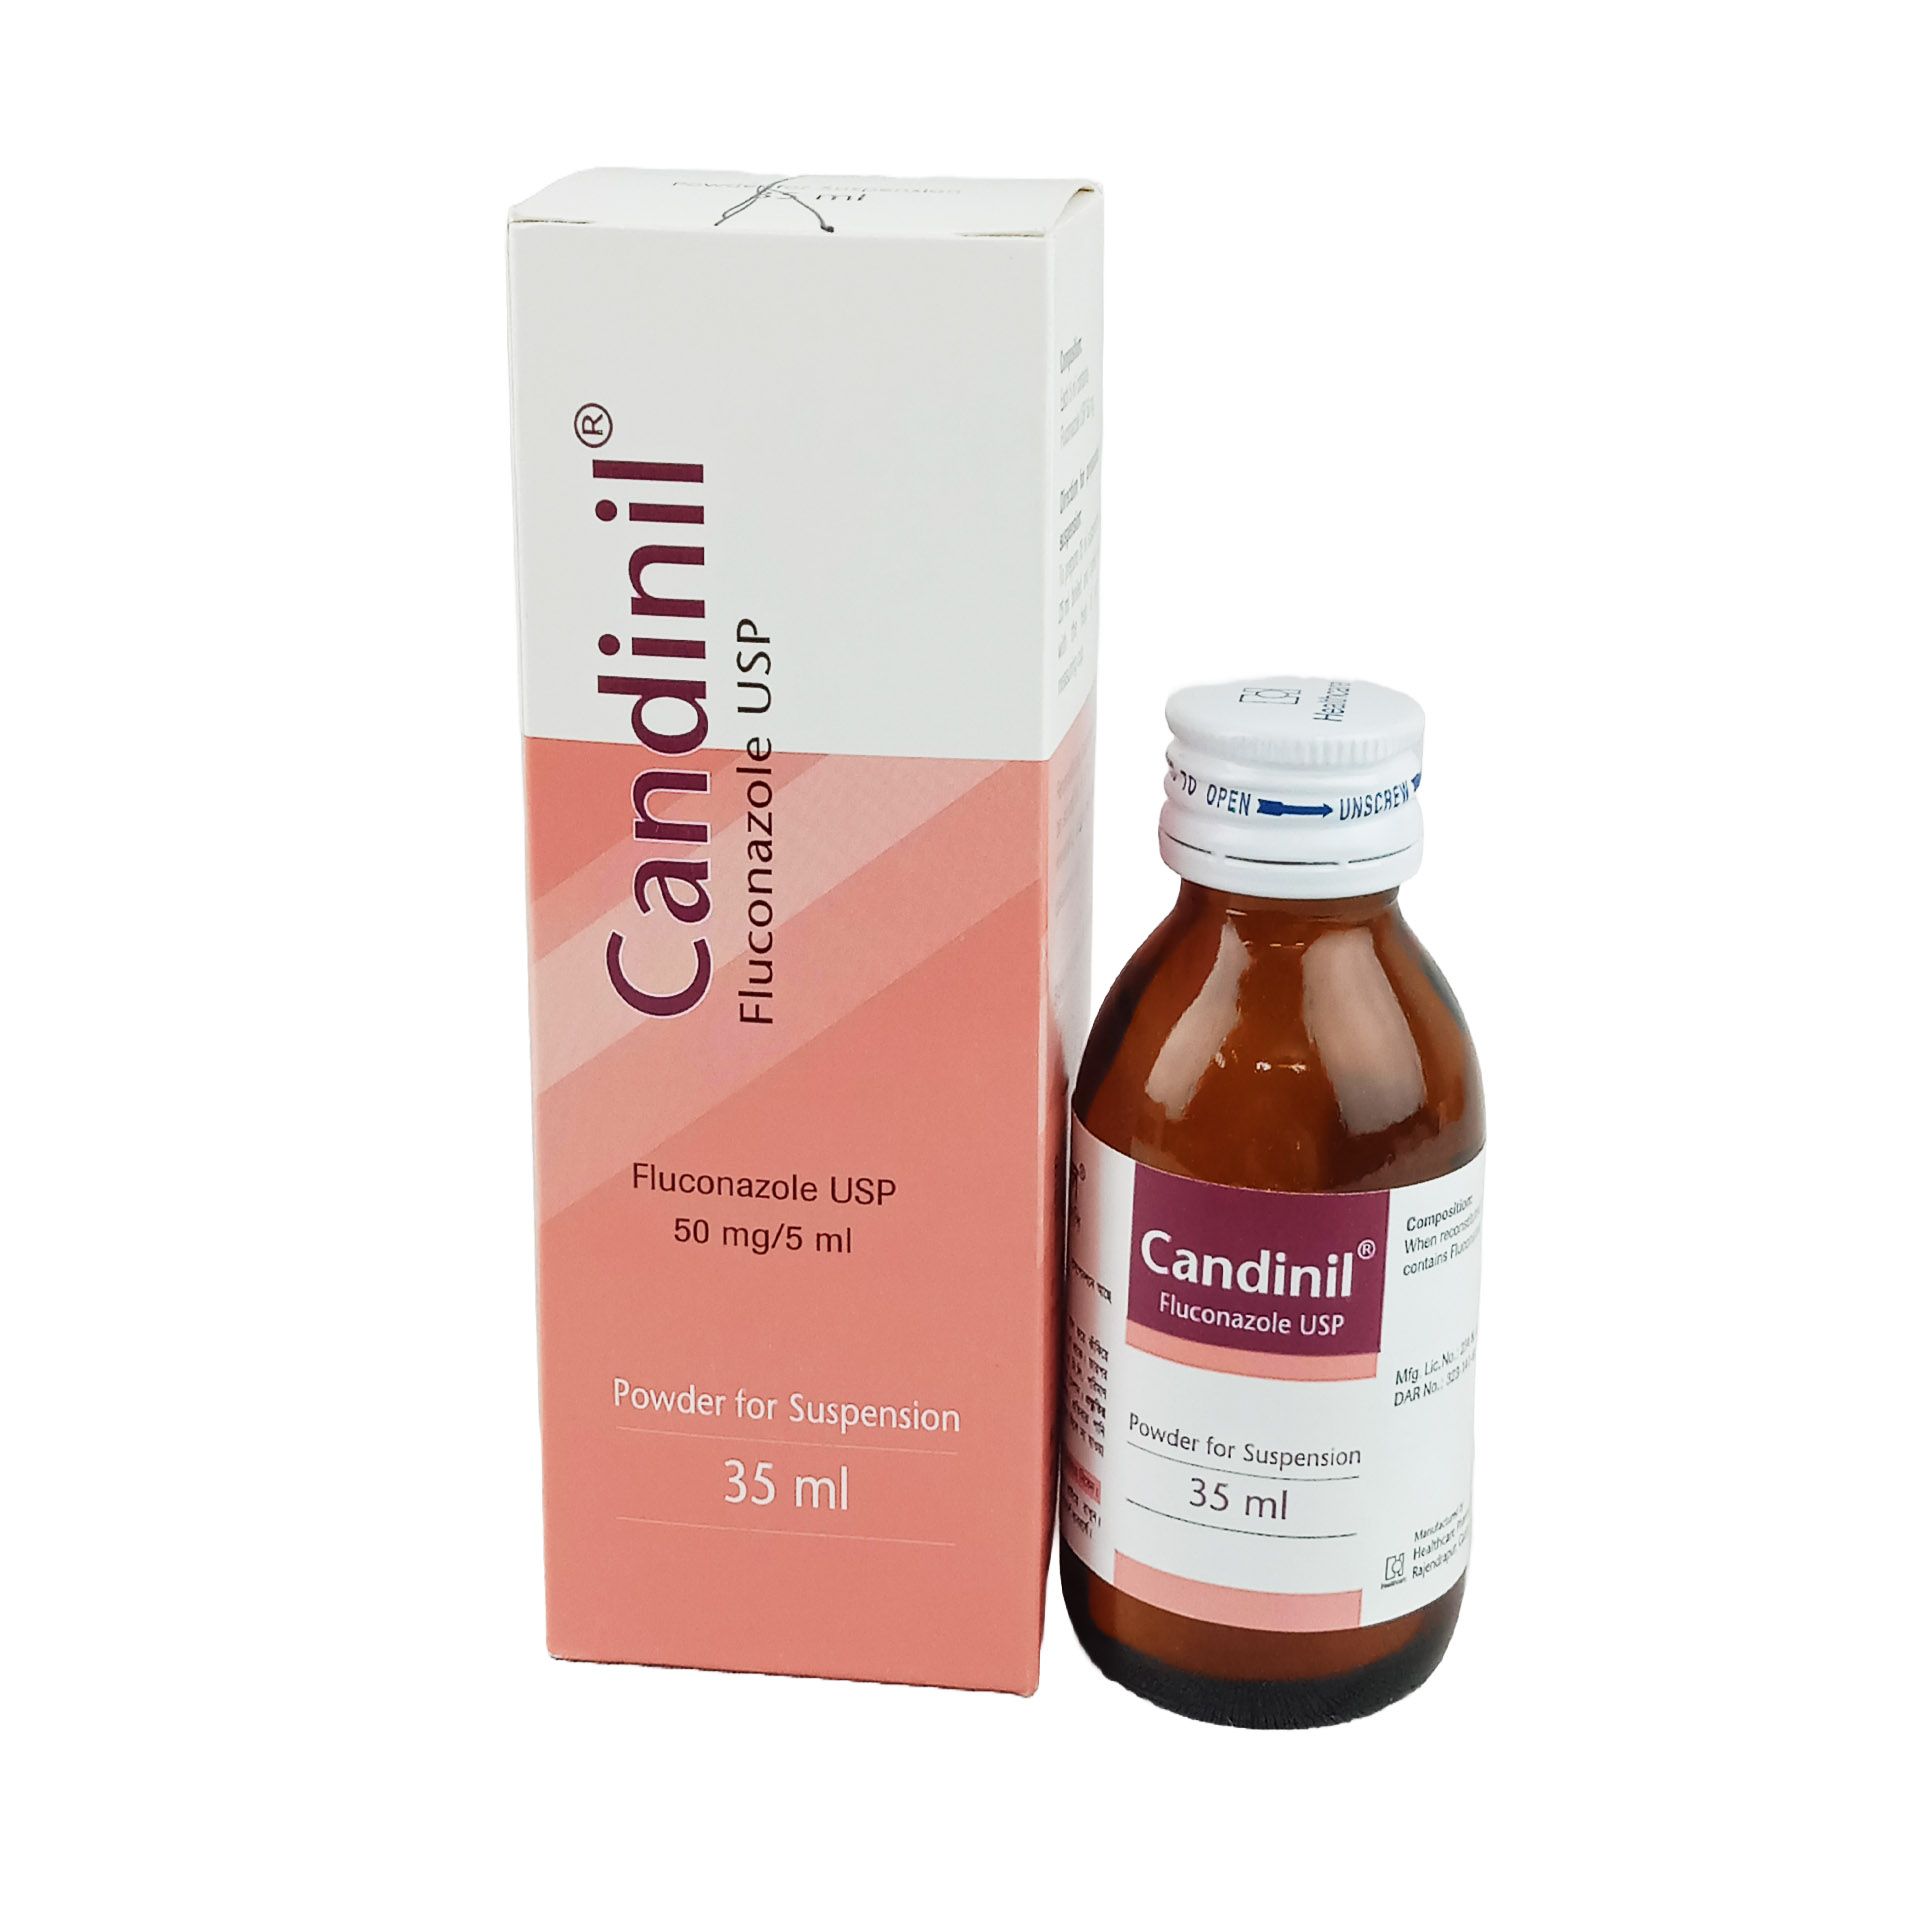 Candinil 50mg/5ml Powder for Suspension